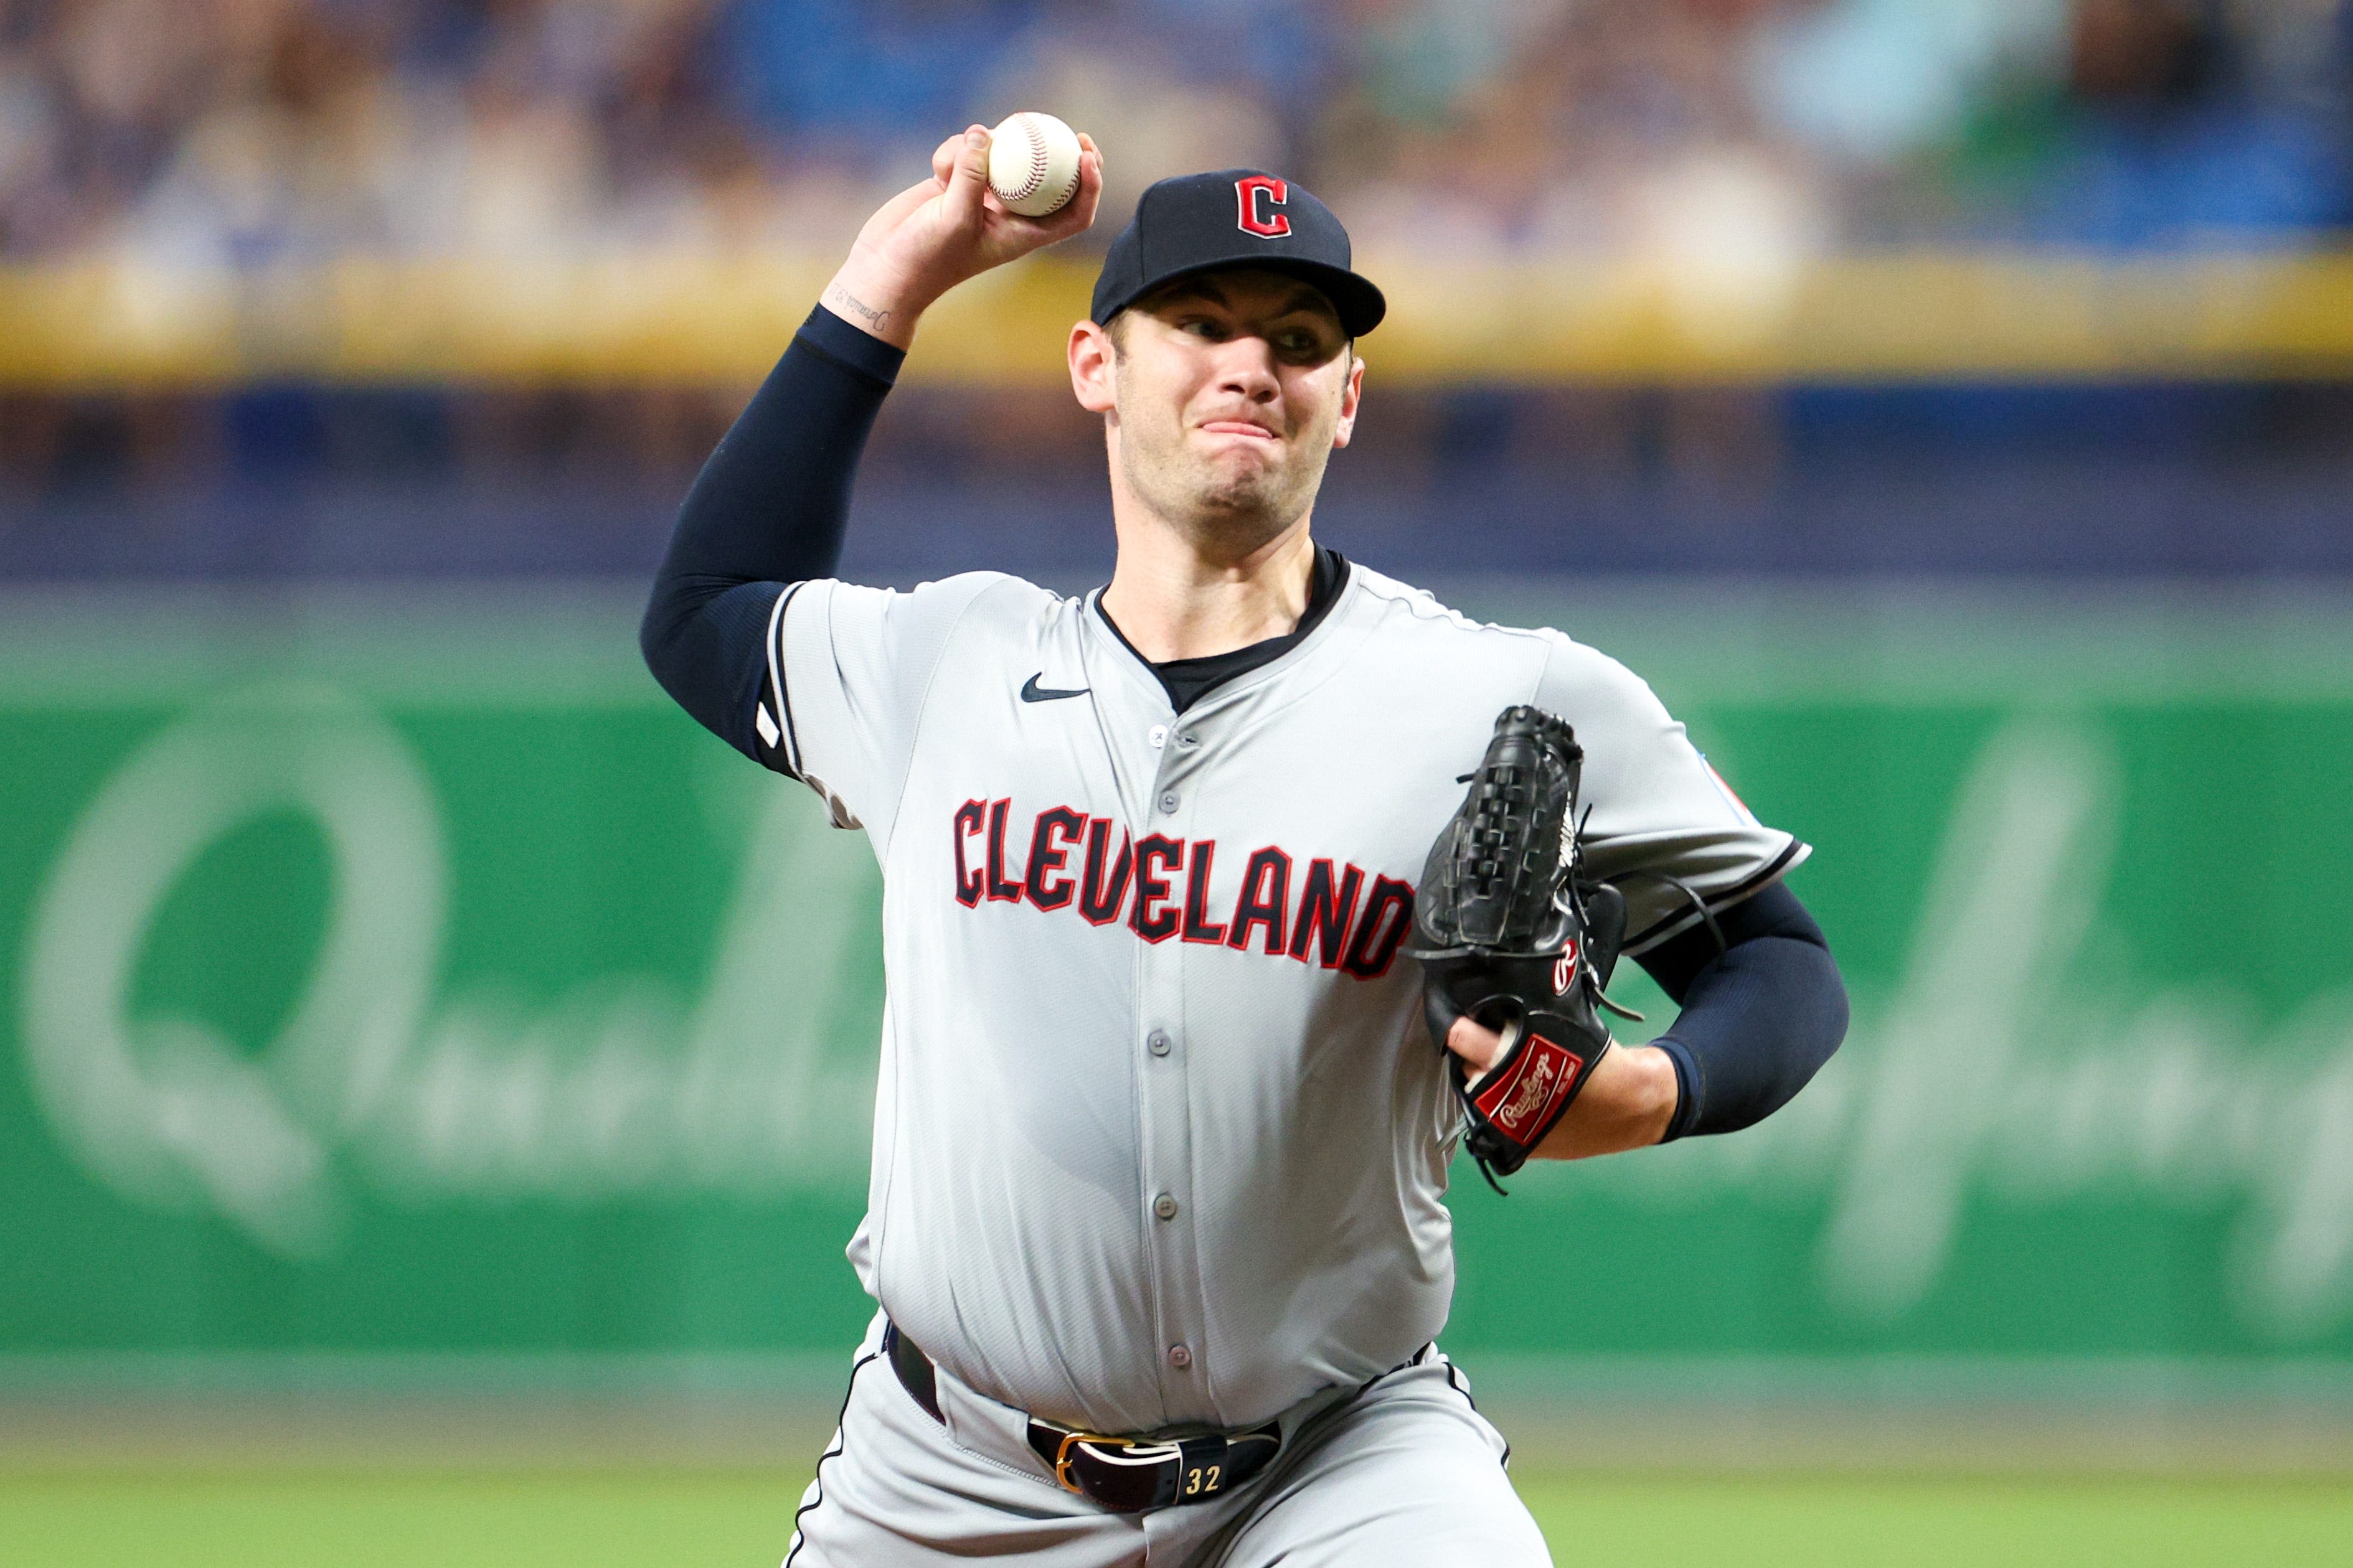 Cleveland Guardians vs. Detroit Tigers live score updates and highlights